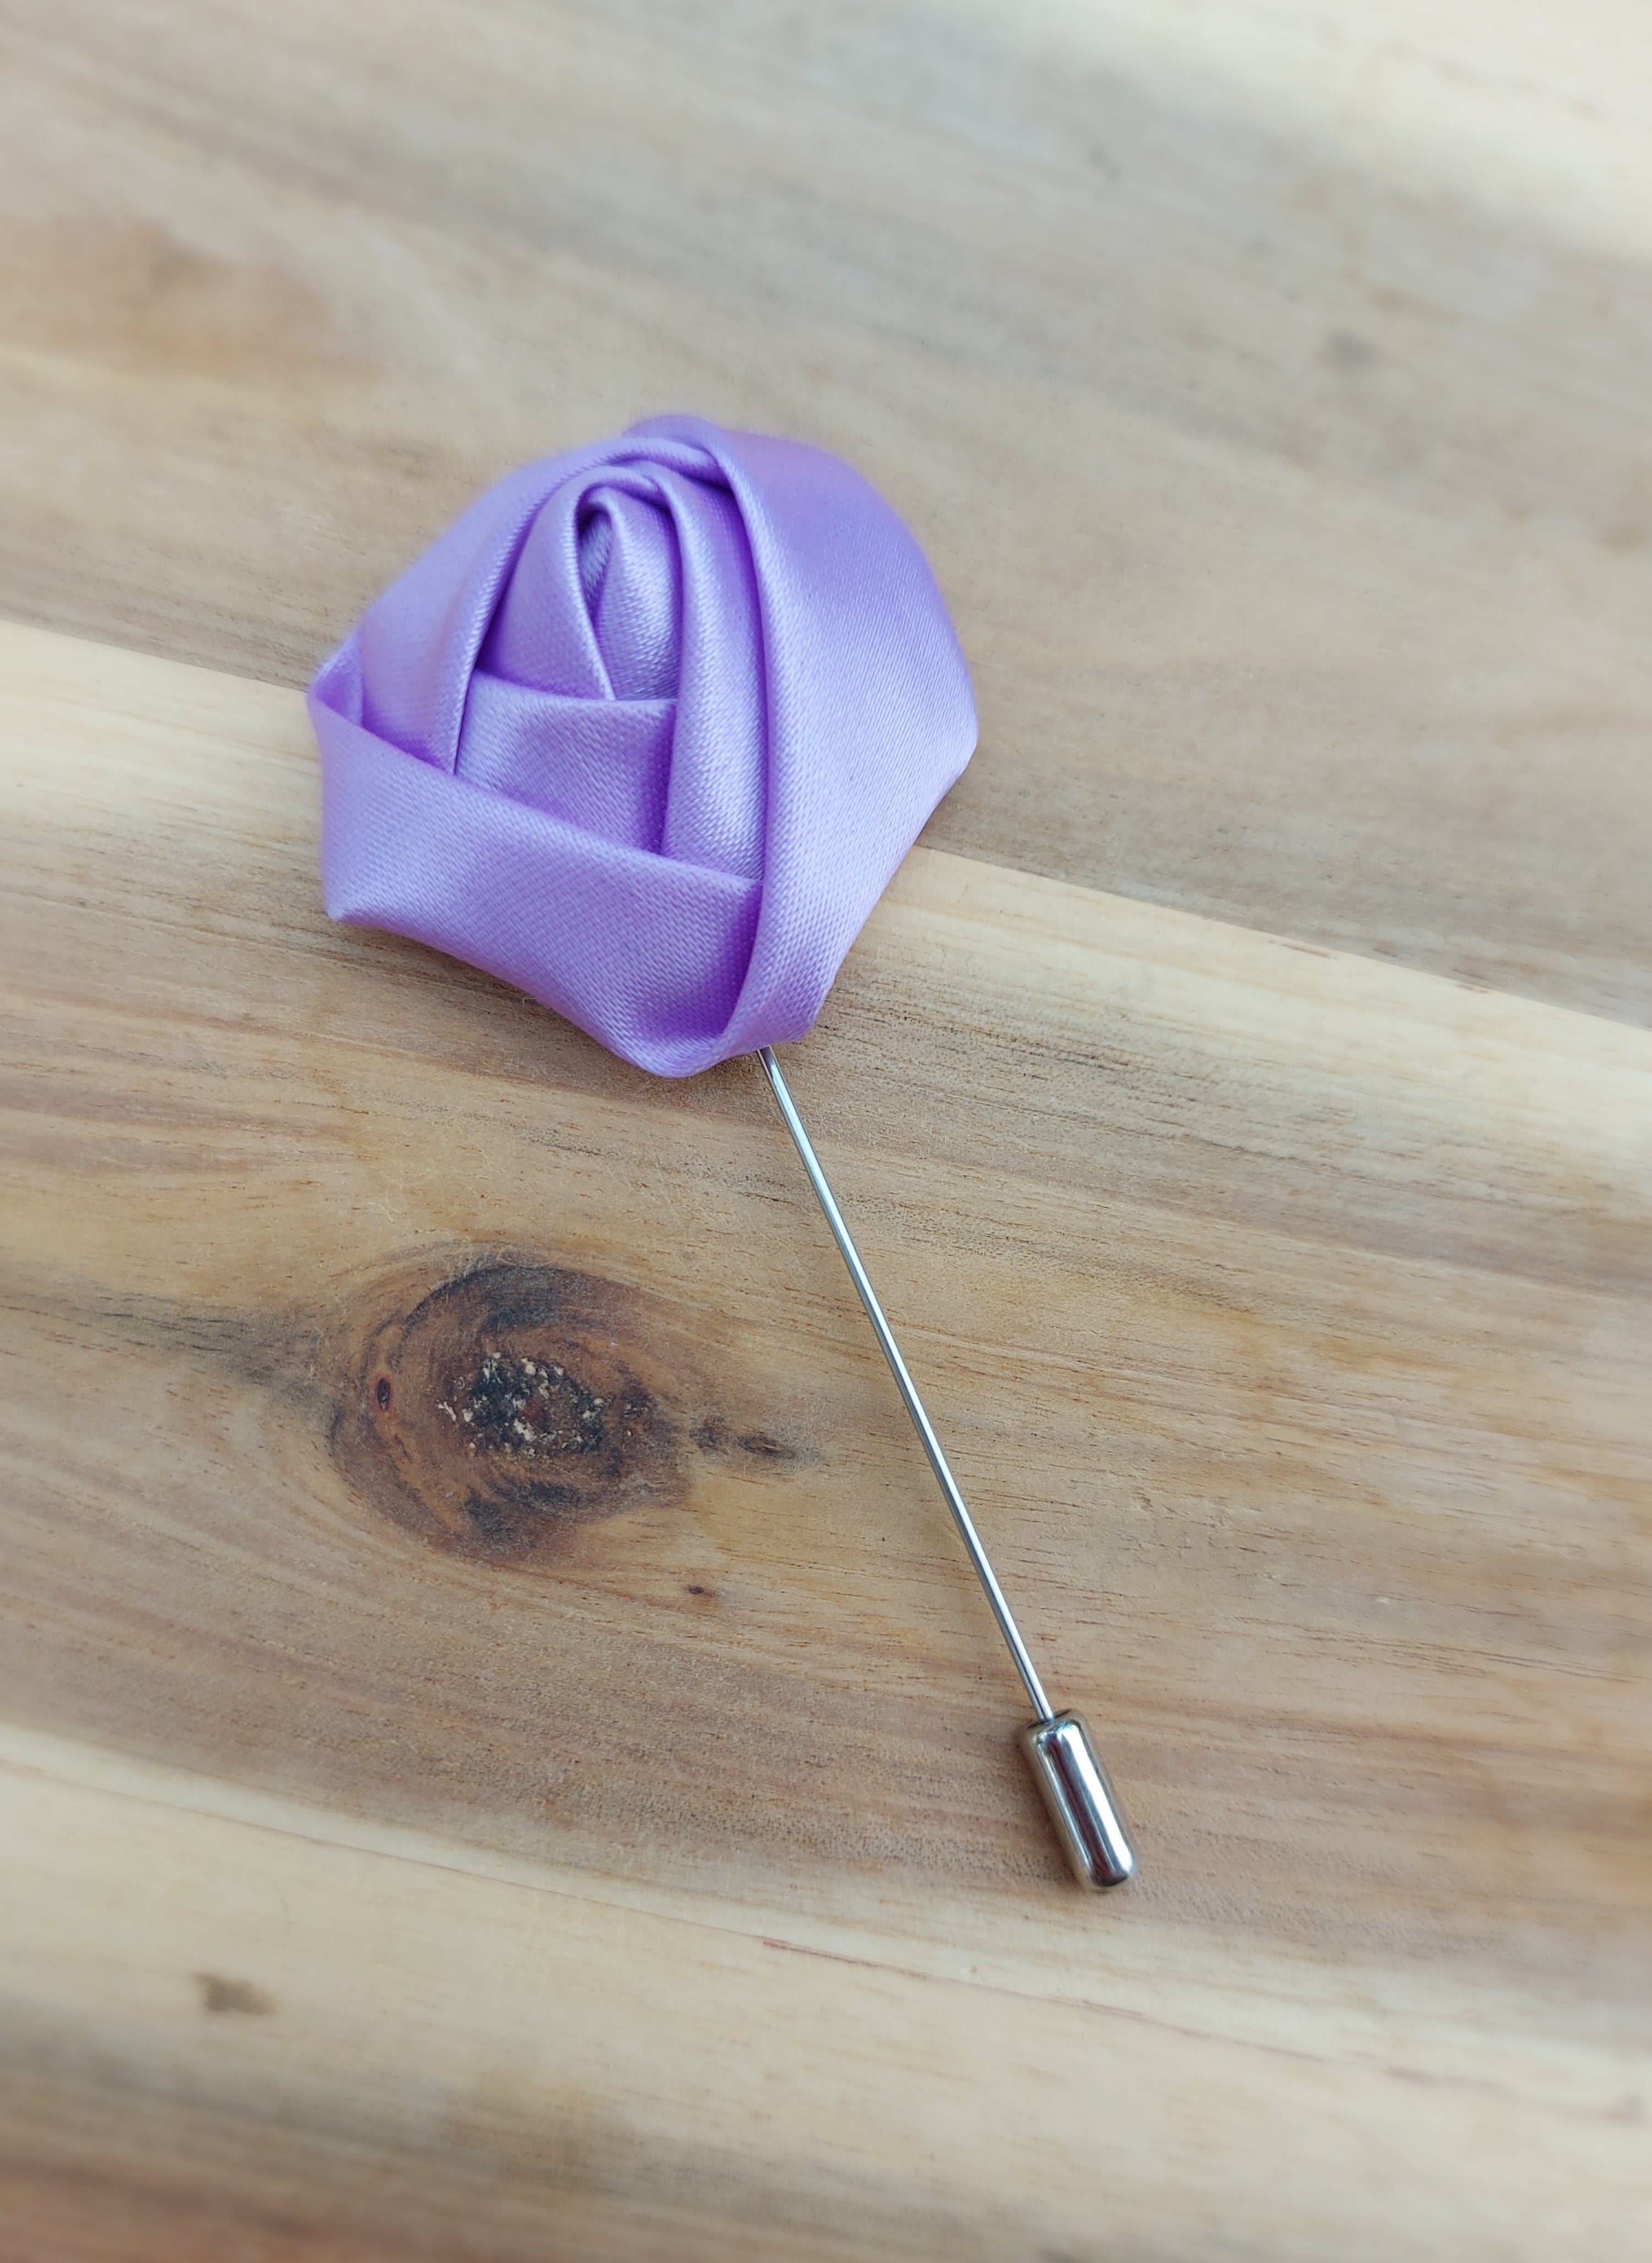 Mens Flower Lapel Pin - other colours available